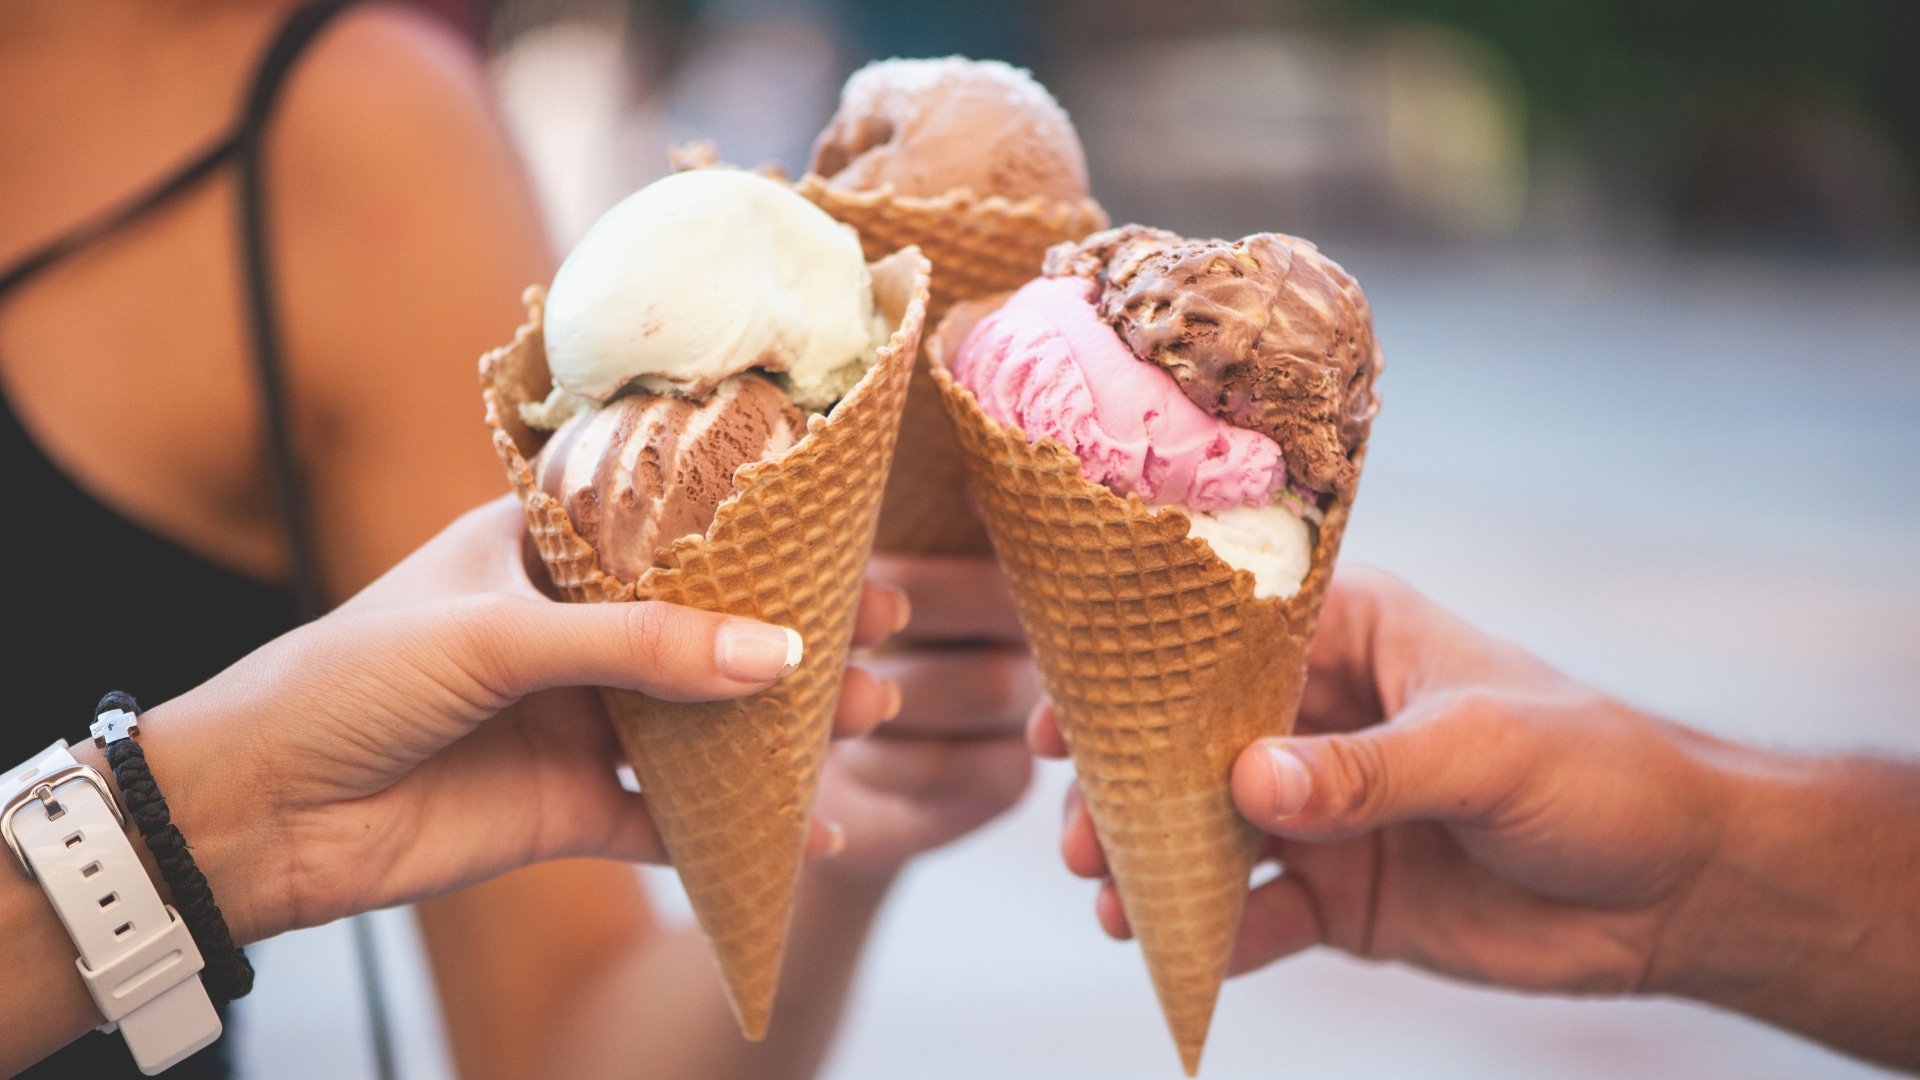 Things to Do in Orlando During the Summer - Ice Cream